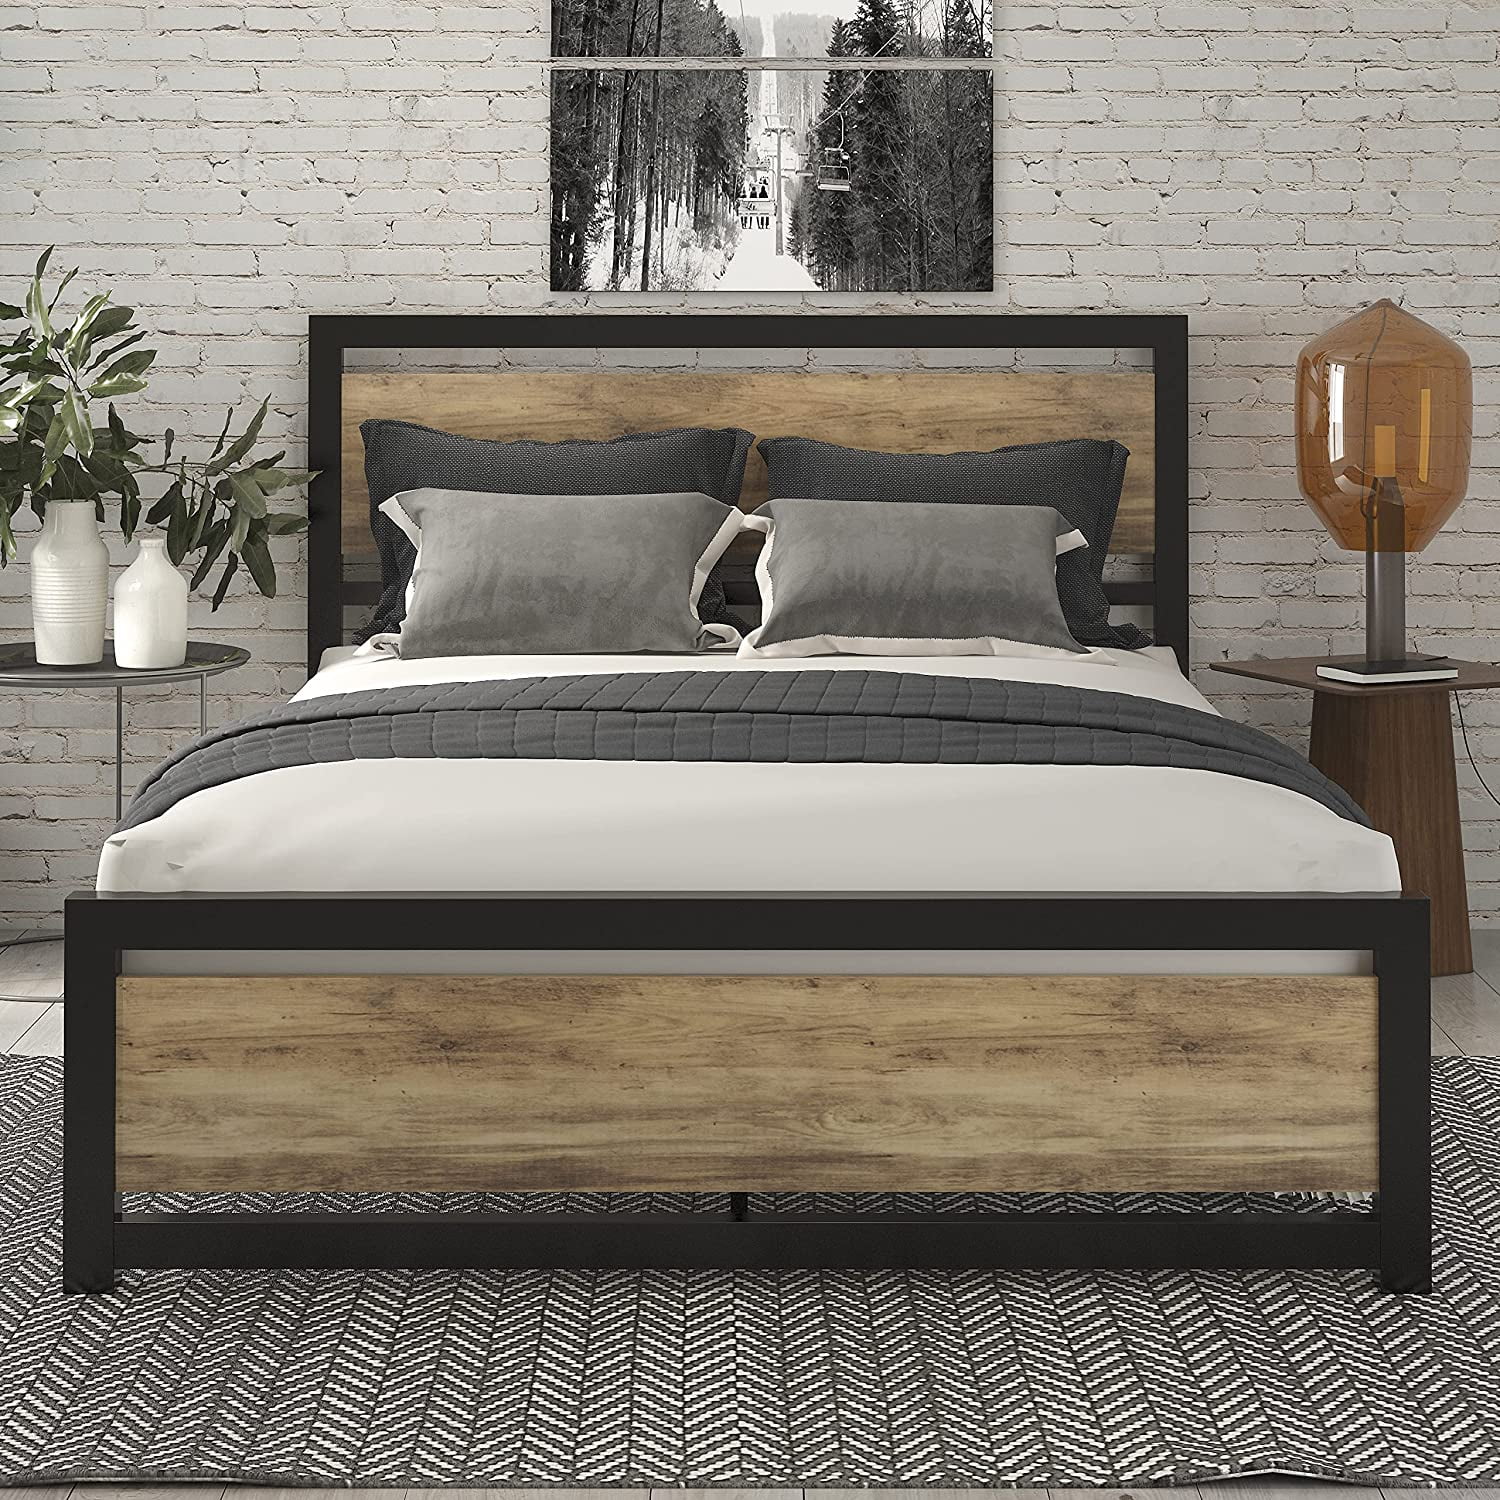 Buy Sha Cerlin Queen Size Metal Platform Bed Frame with Headboard and